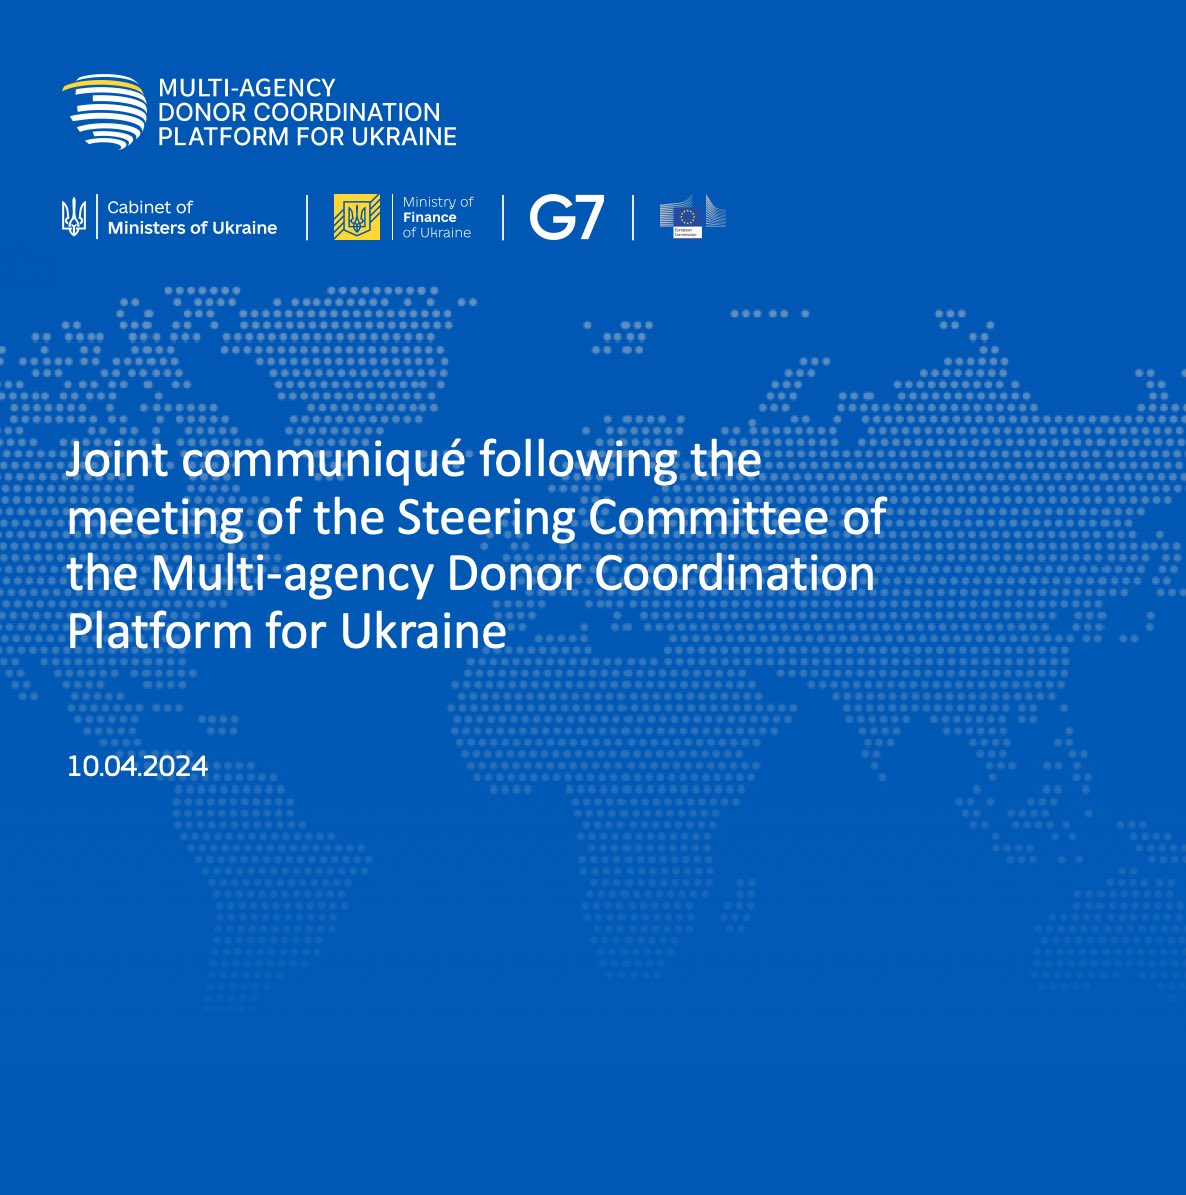 Following a meeting of the Steering Committee of the Multi-agency Donor Coordination Platform for Ukraine, the participating countries issued the following release. Details: surl.li/smocv